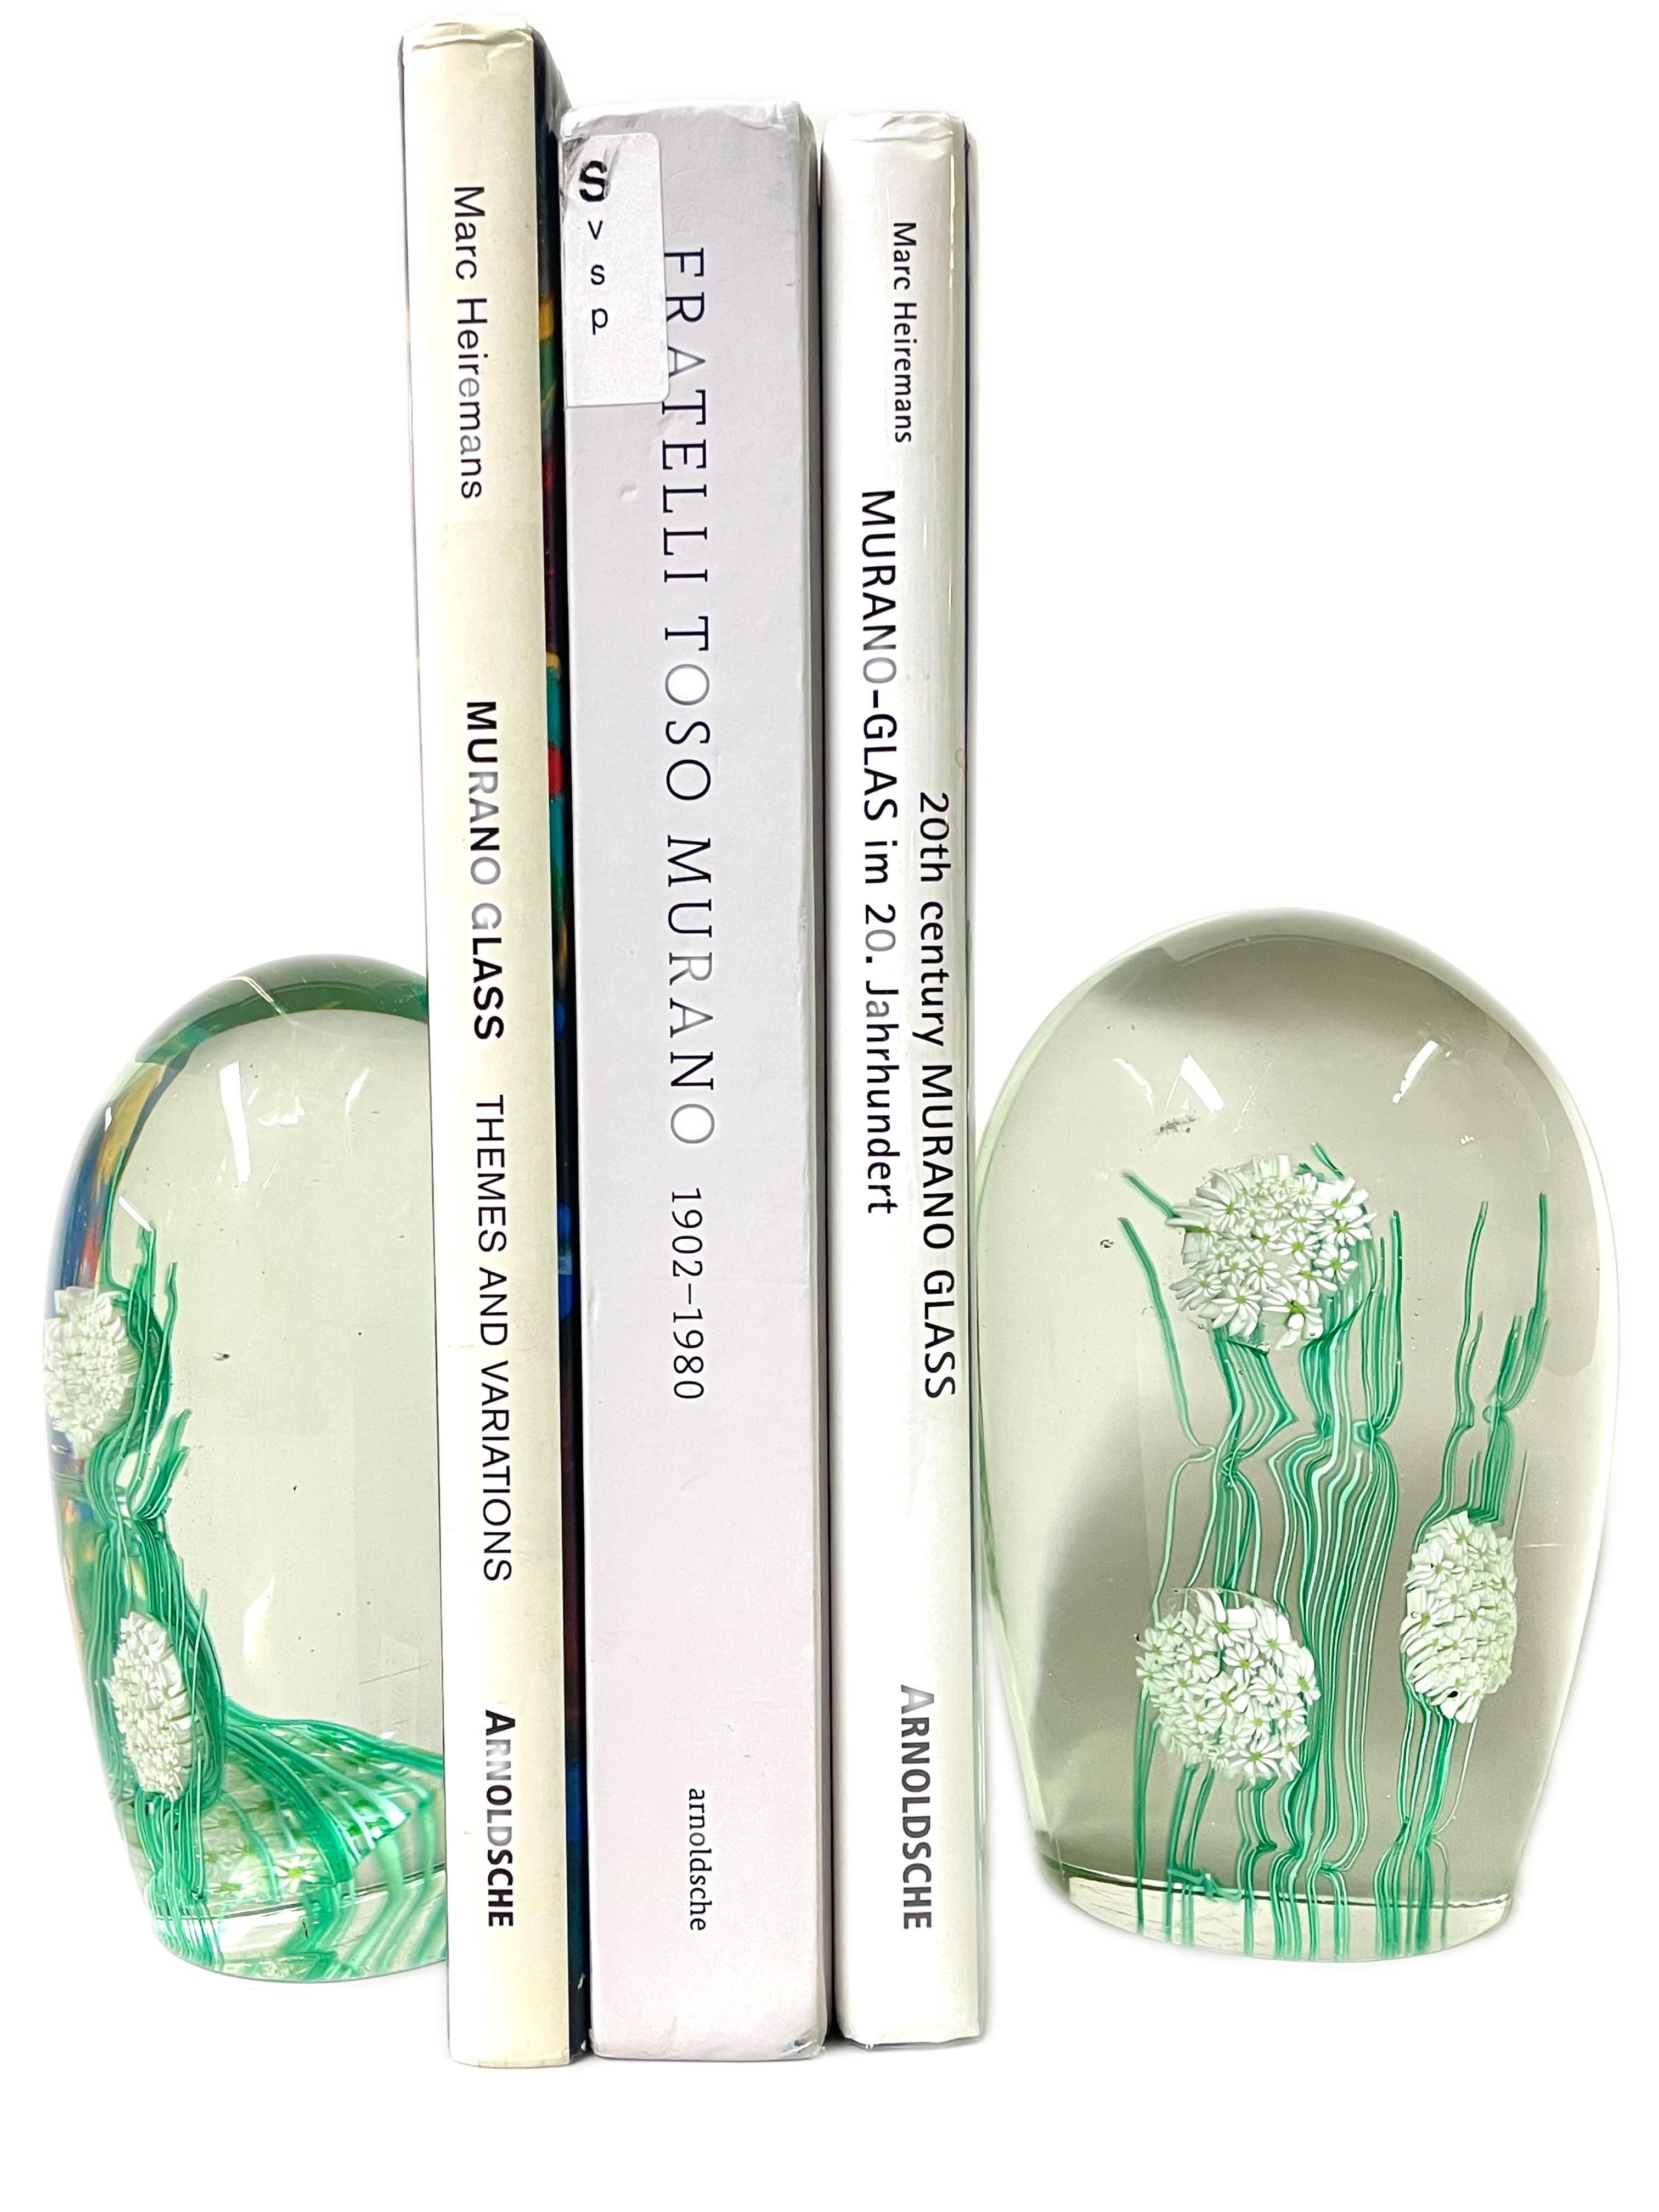 Hand-Crafted Mid-Century Modern Italian Art Glass Murano Floral Decorated Bookends For Sale